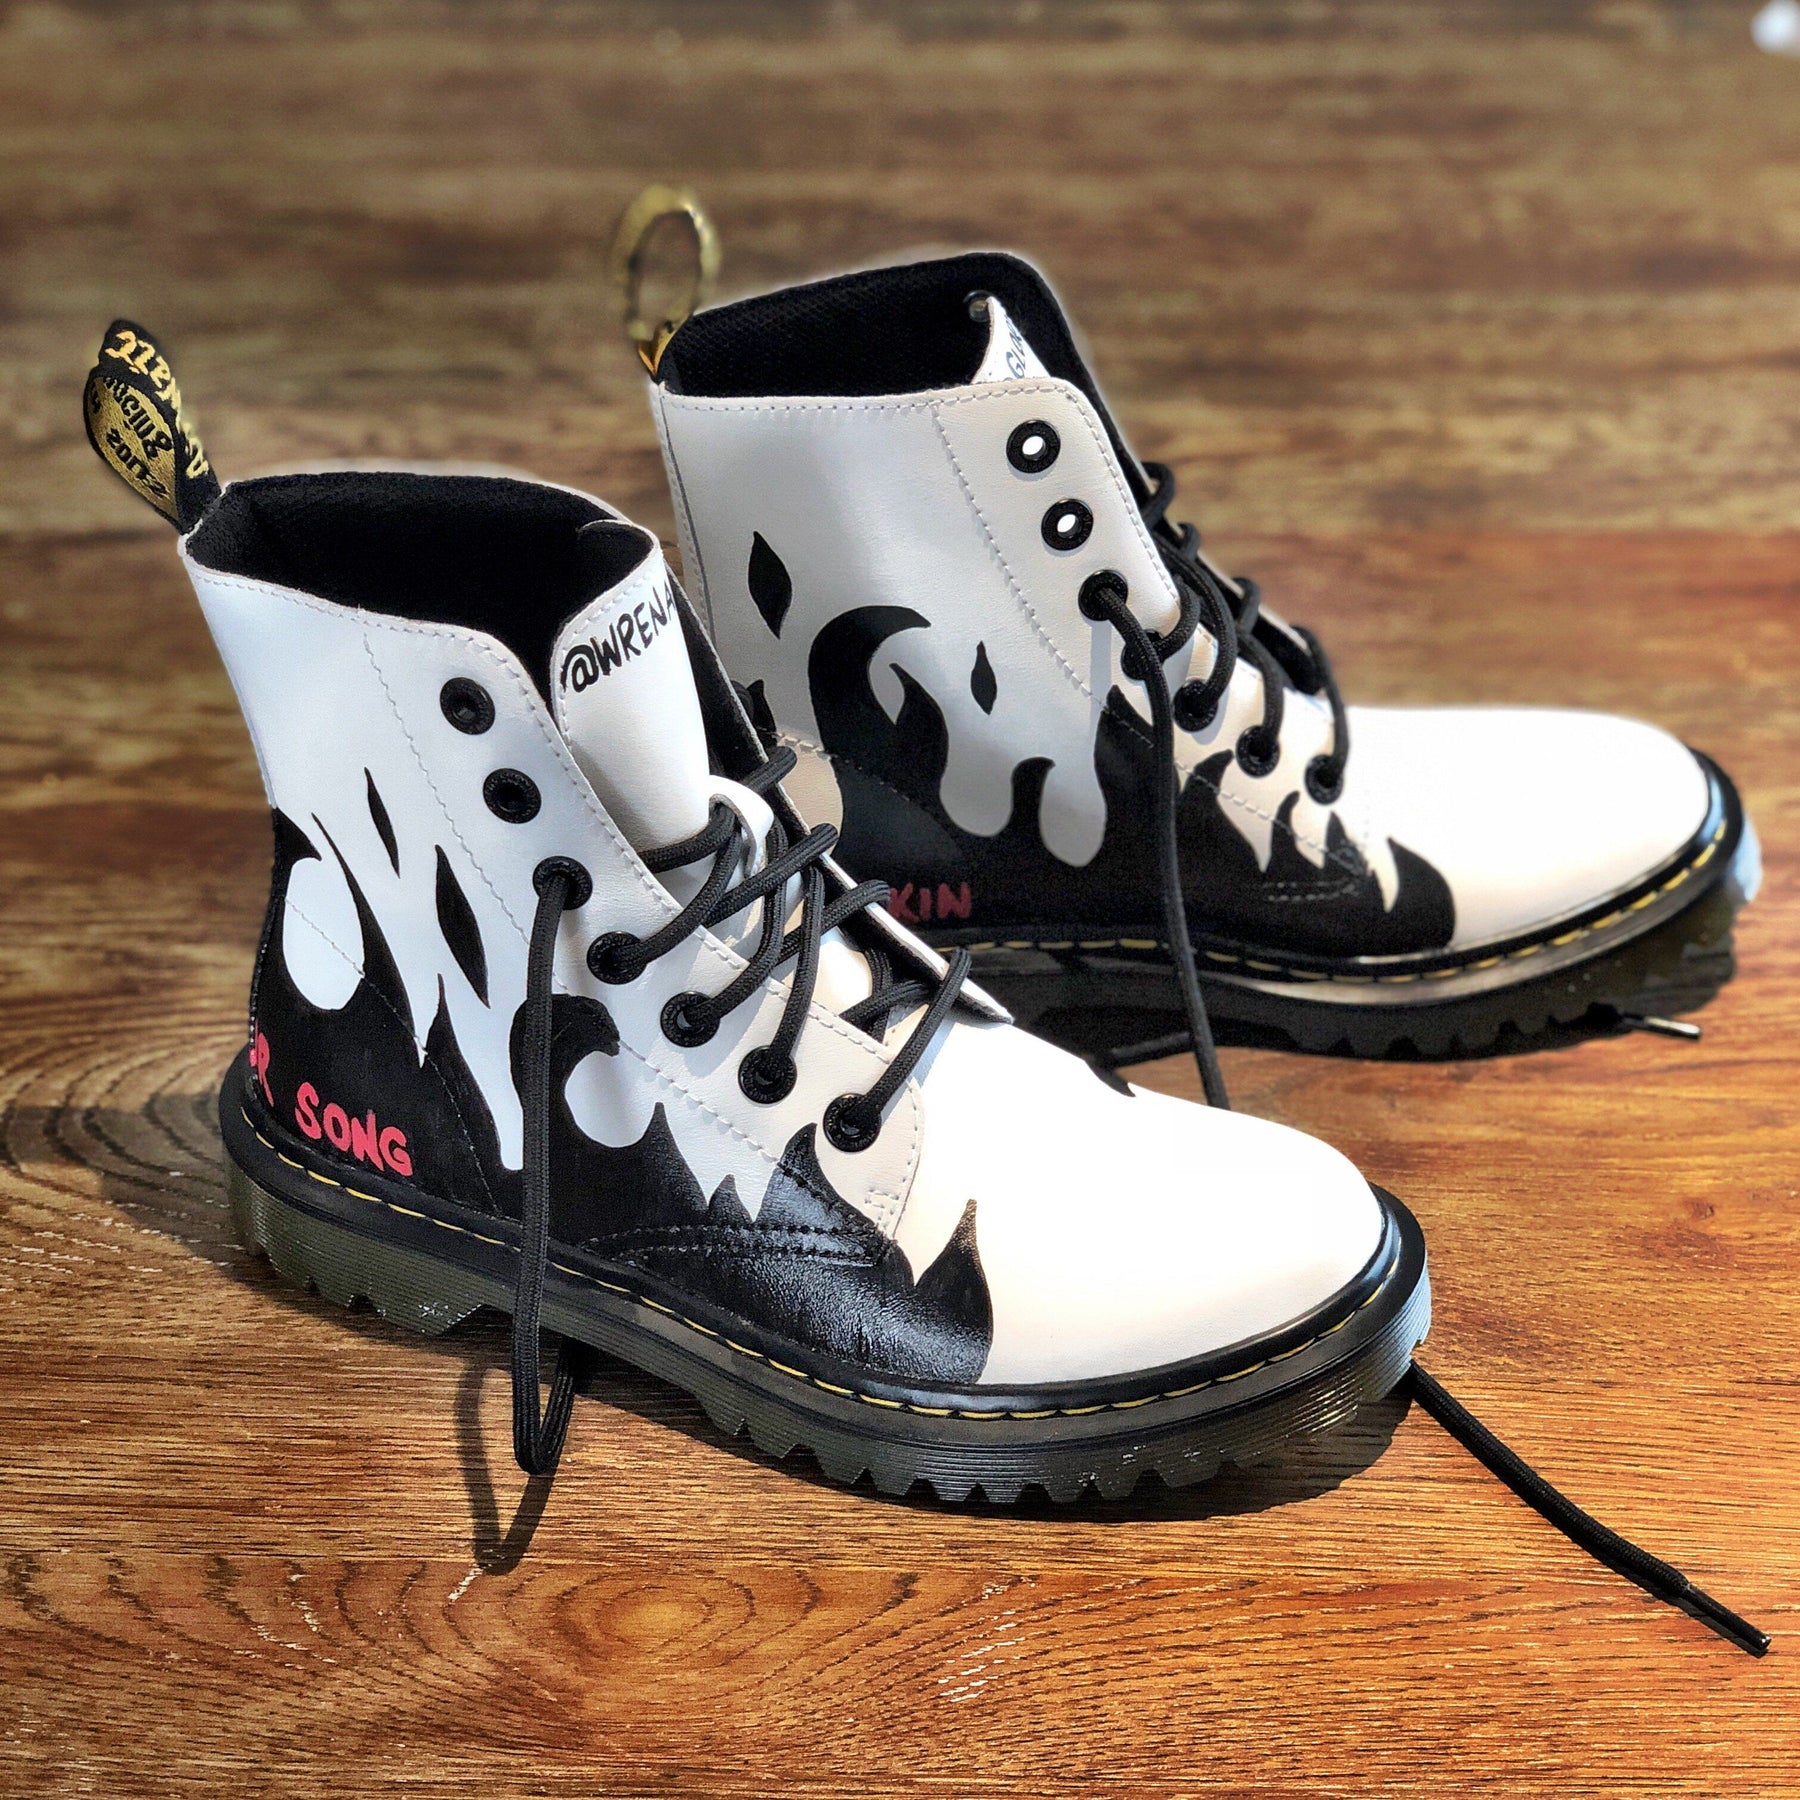 Wren + Glory 'Ride Your Wave' Painted Emu Boots